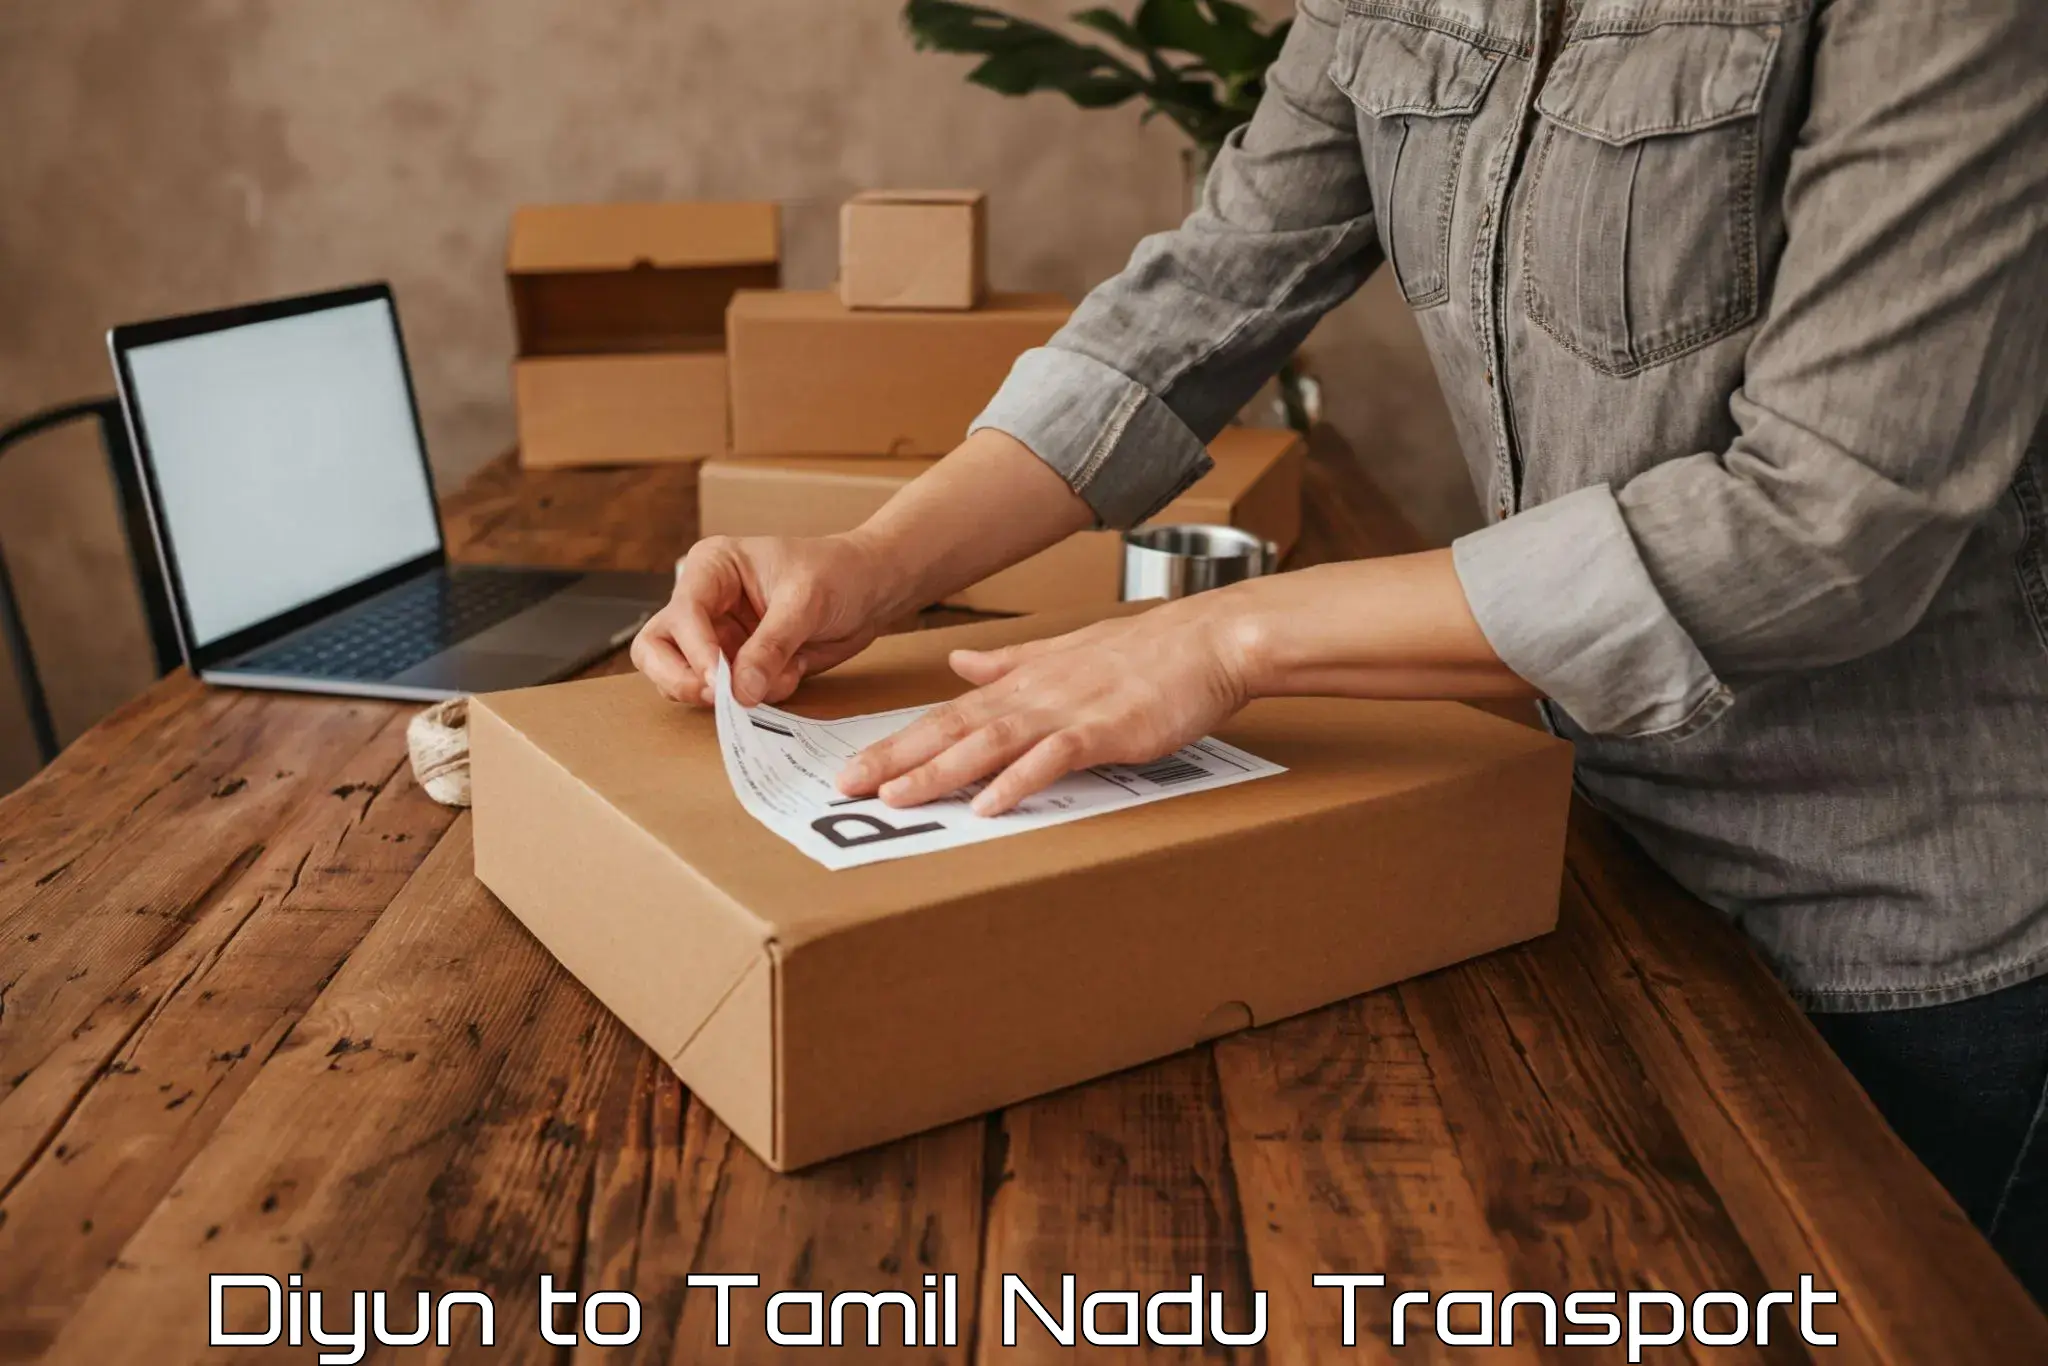 Shipping partner in Diyun to Karunya Institute of Technology and Sciences Coimbatore